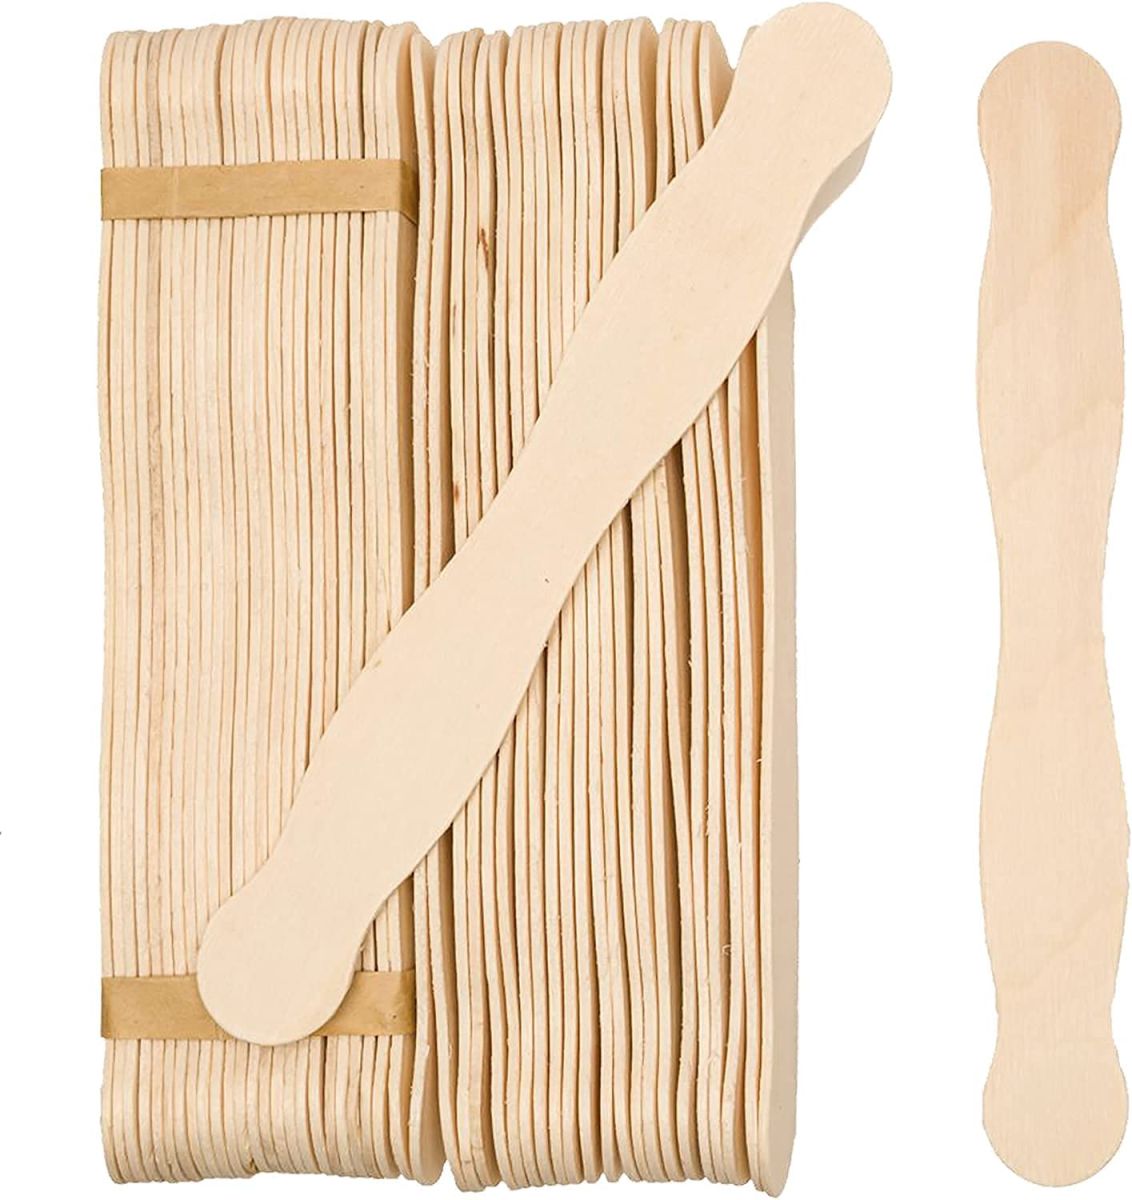 Wooden 8" Fan Handles, Wedding Programs, or Paint Mixing, Pack 100, Jumbo Craft Popsicle Sticks for Auction Bid Paddles, Wooden Wavy Flat Stems for Any DIY Crafting Supplies Kit